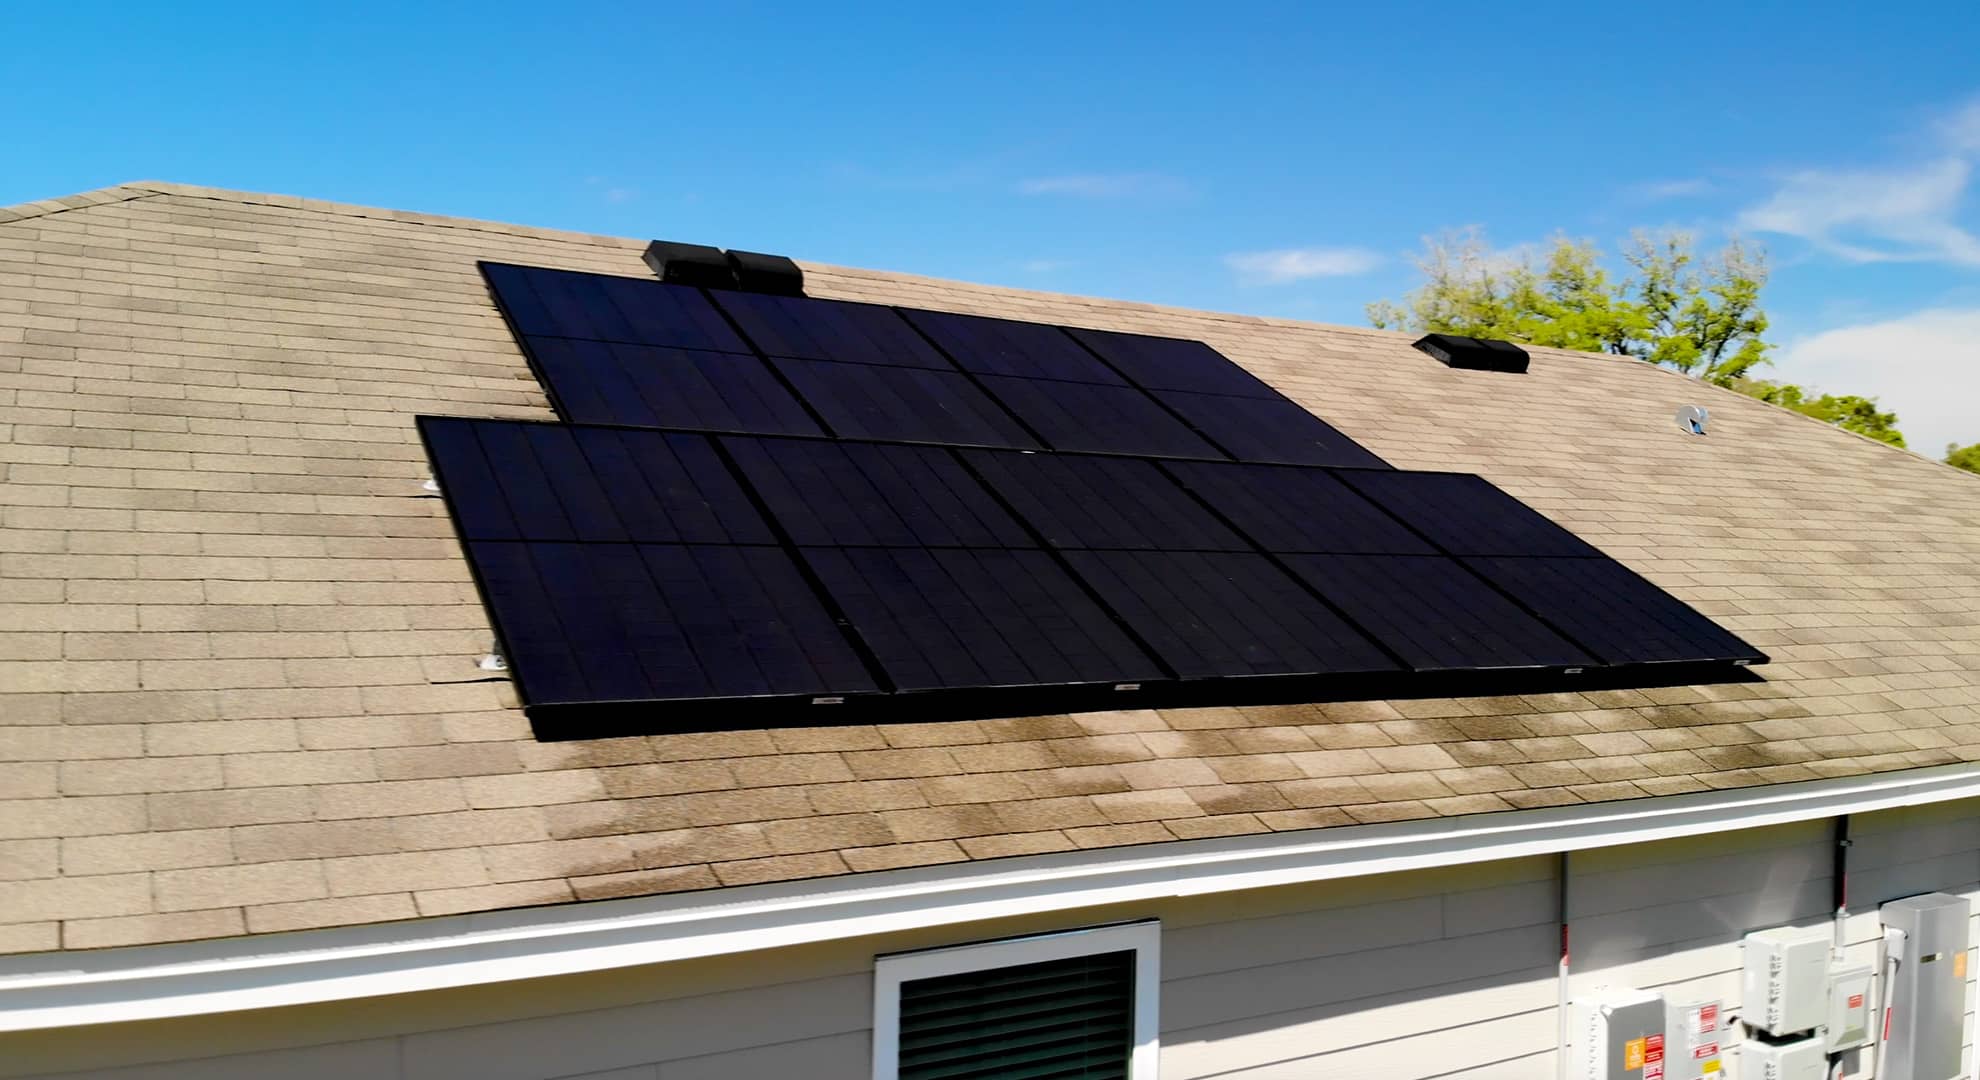 EnLight Energy | Start Saving Money by Installing Solar Panels To Your Home